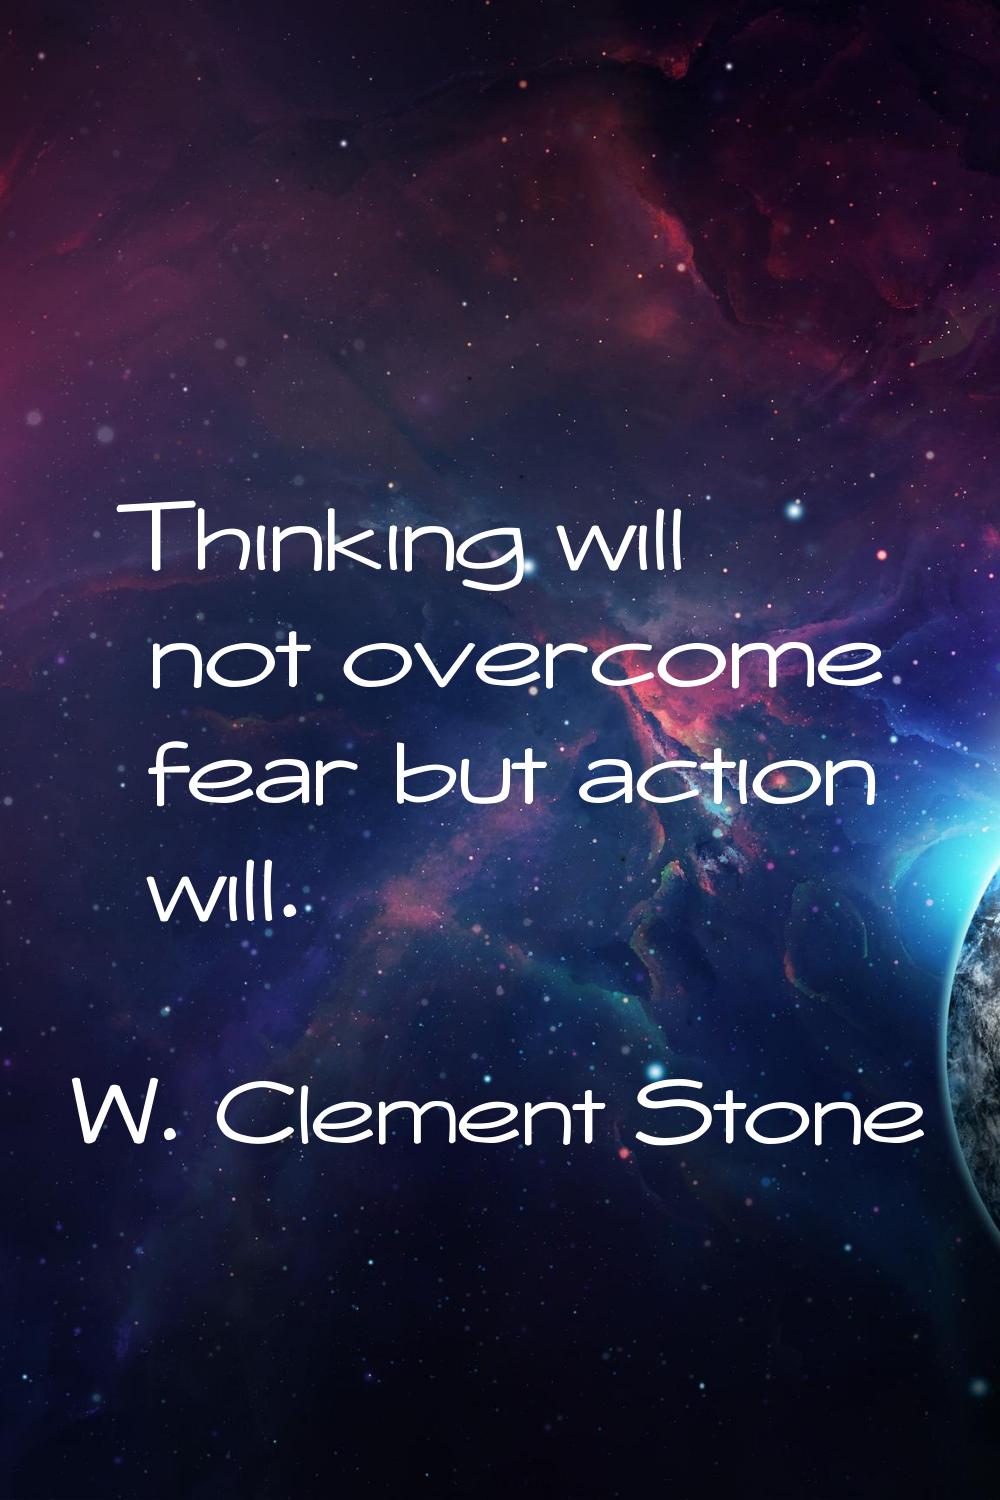 Thinking will not overcome fear but action will.